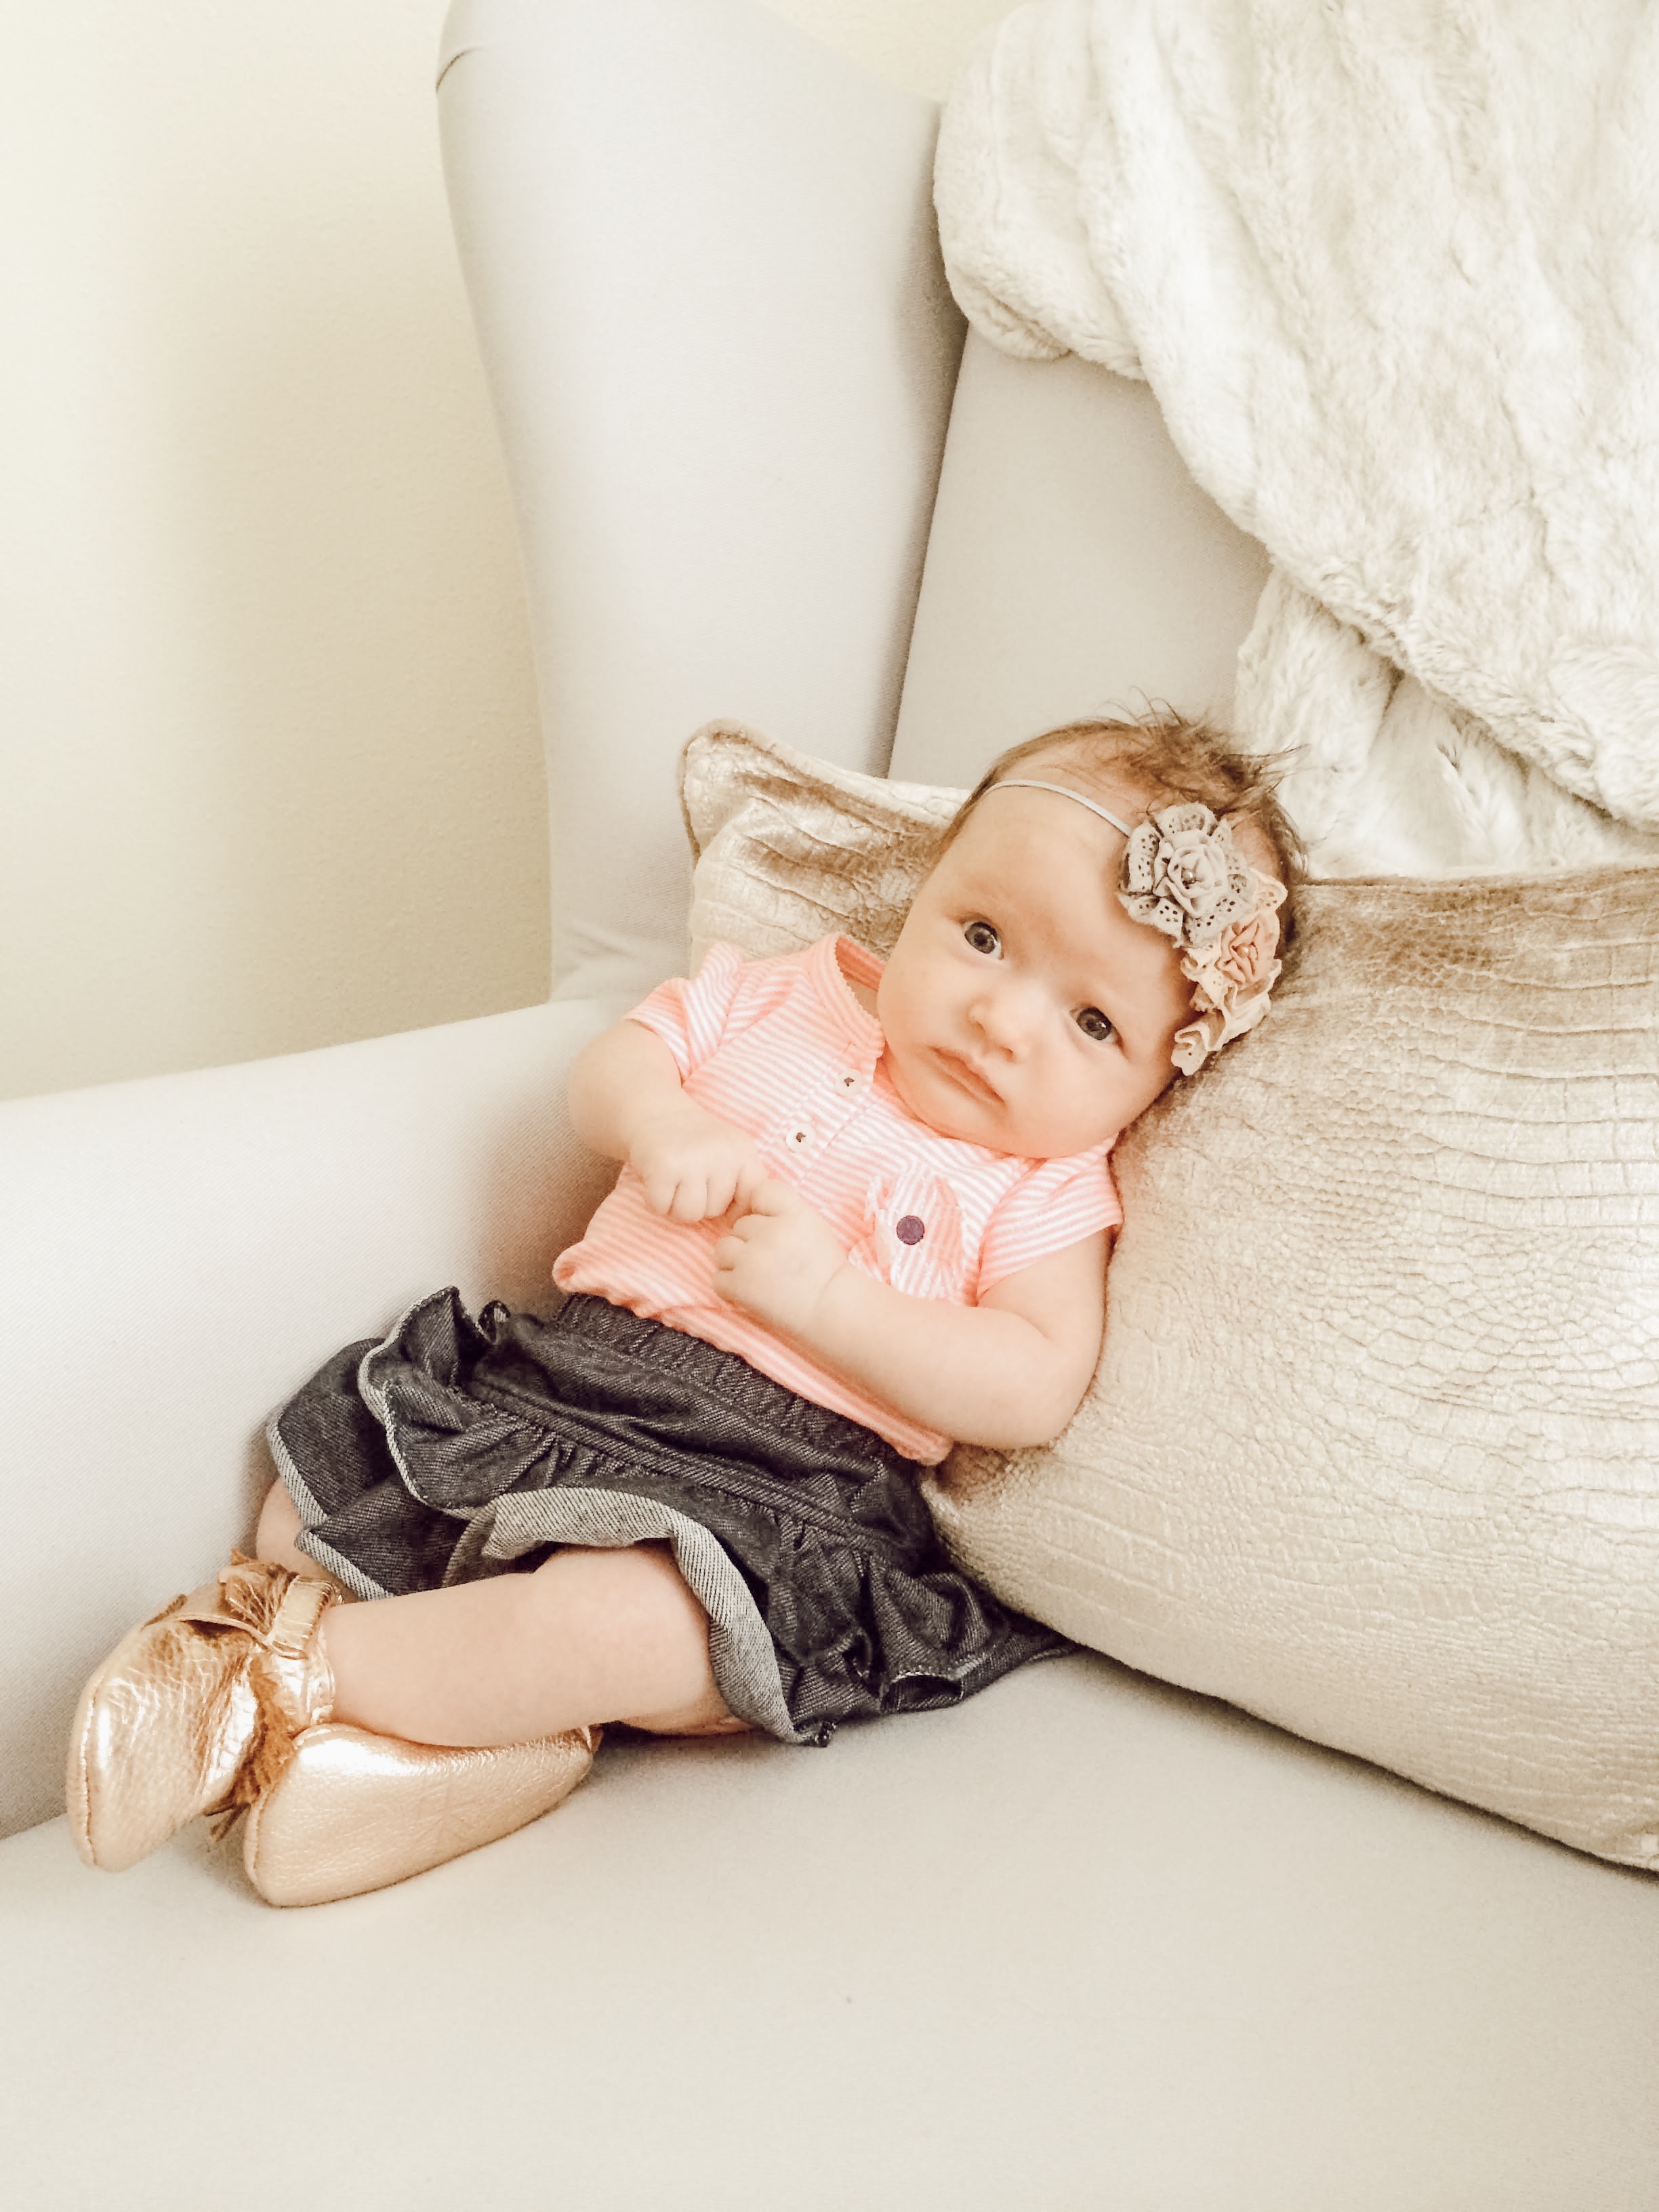 Newborn baby girl with freshly picked moccassins and headband